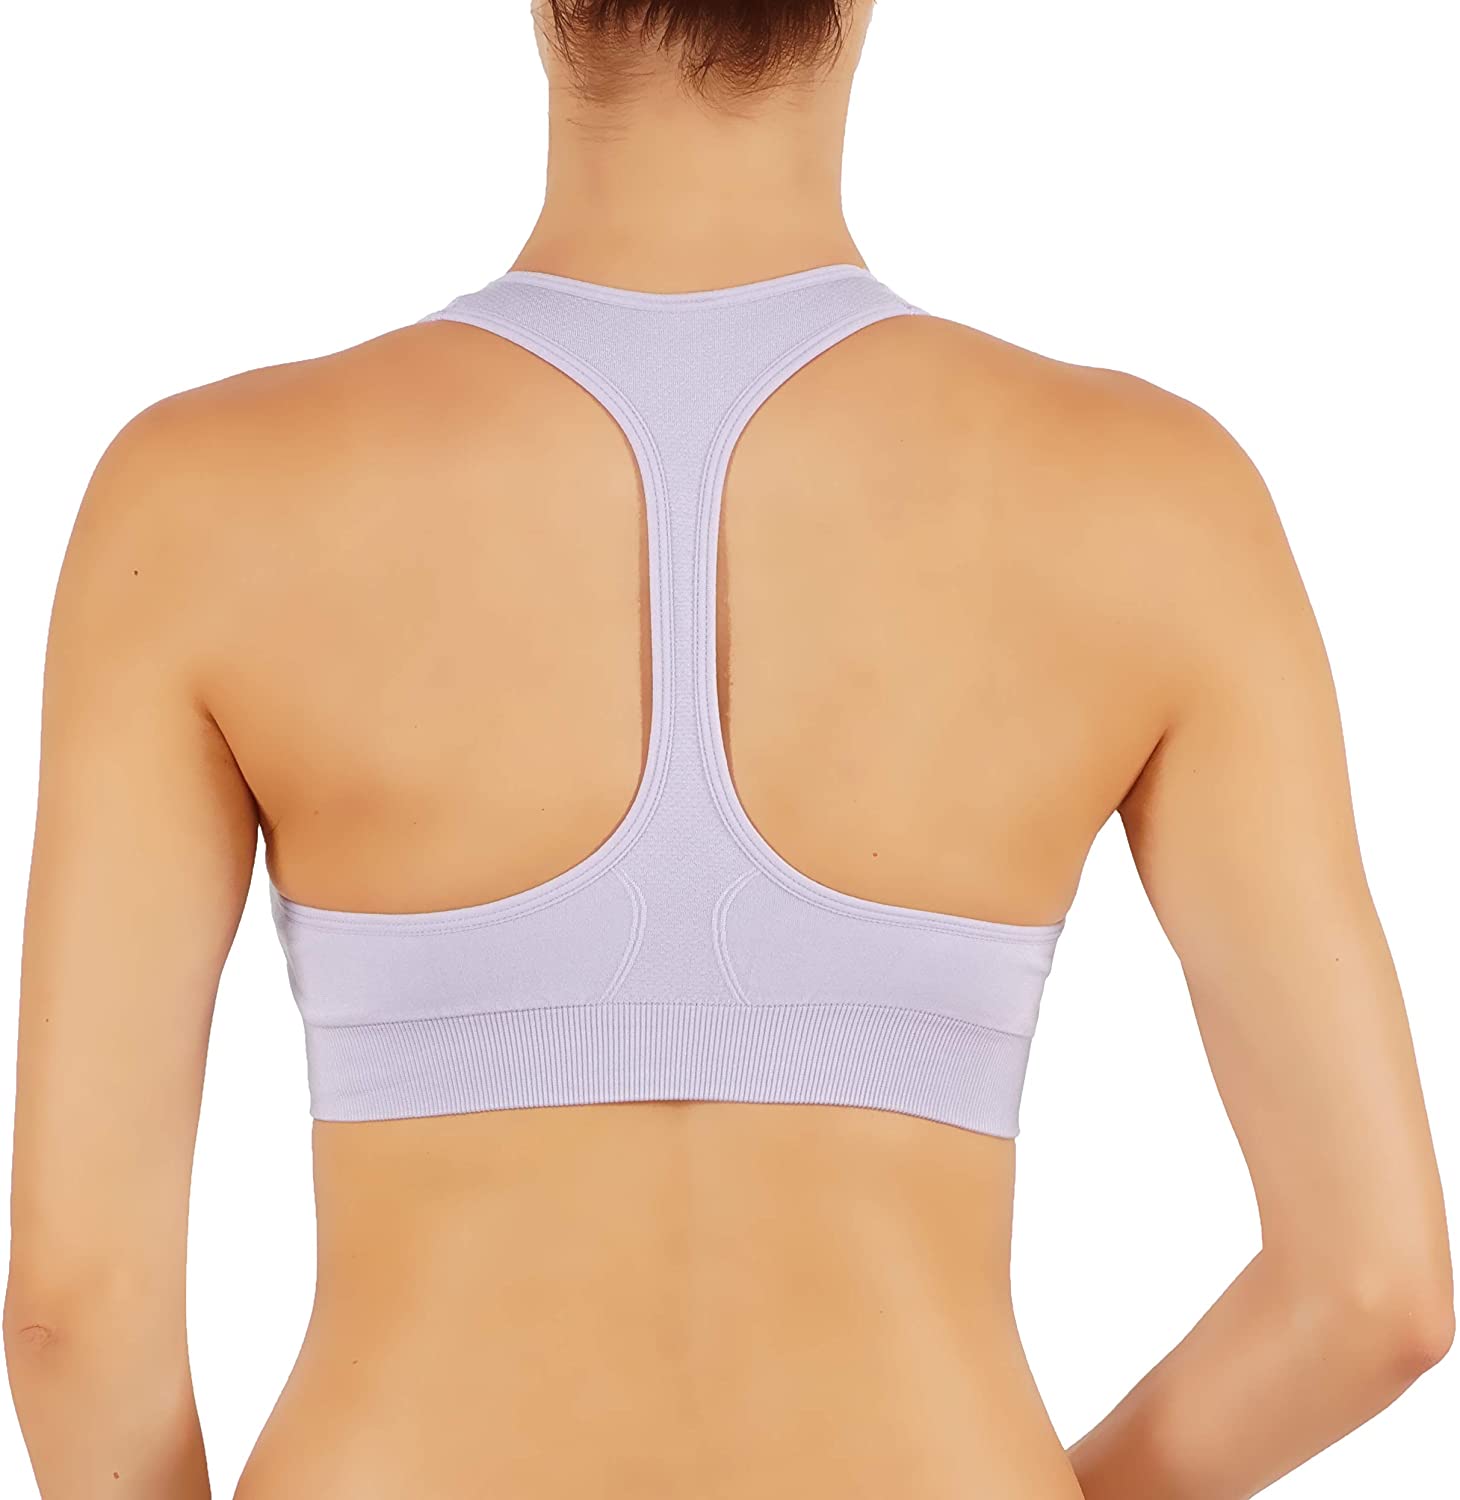 Price:$13.55 Bise Women's Yoga Top Sports Bra Removable Padding Race T-Back at Amazon Women’s Clothing store